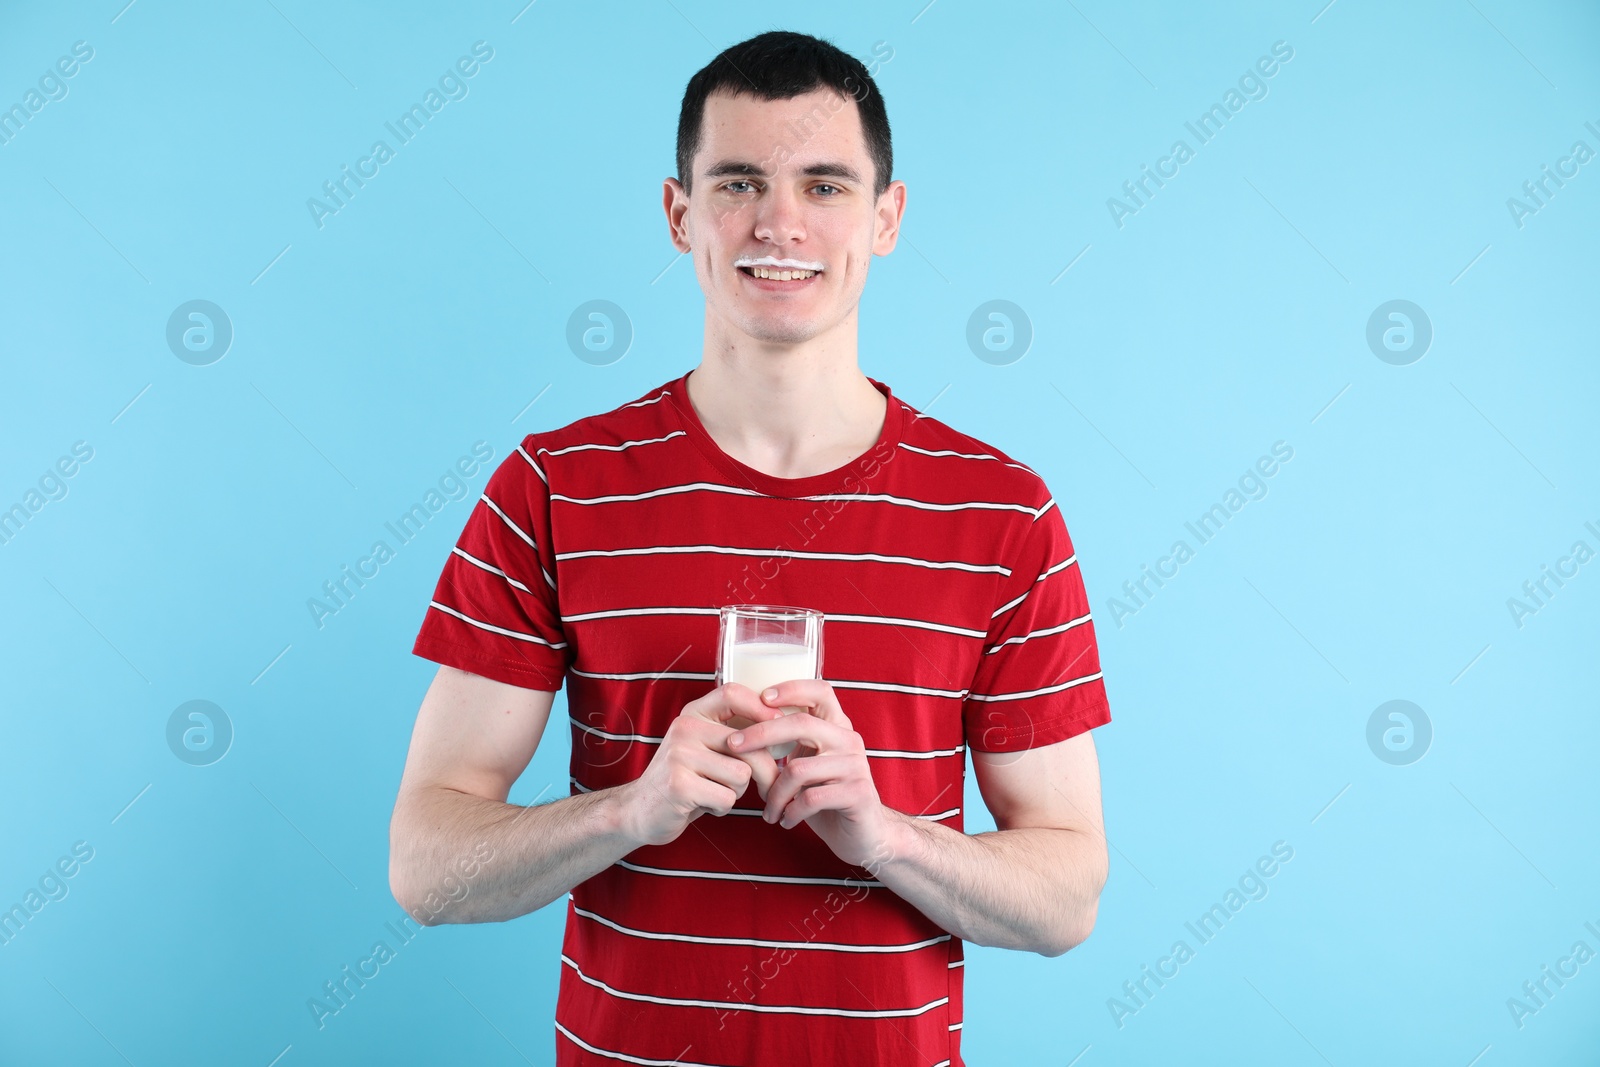 Photo of Happy man with milk mustache holding glass of tasty dairy drink on light blue background